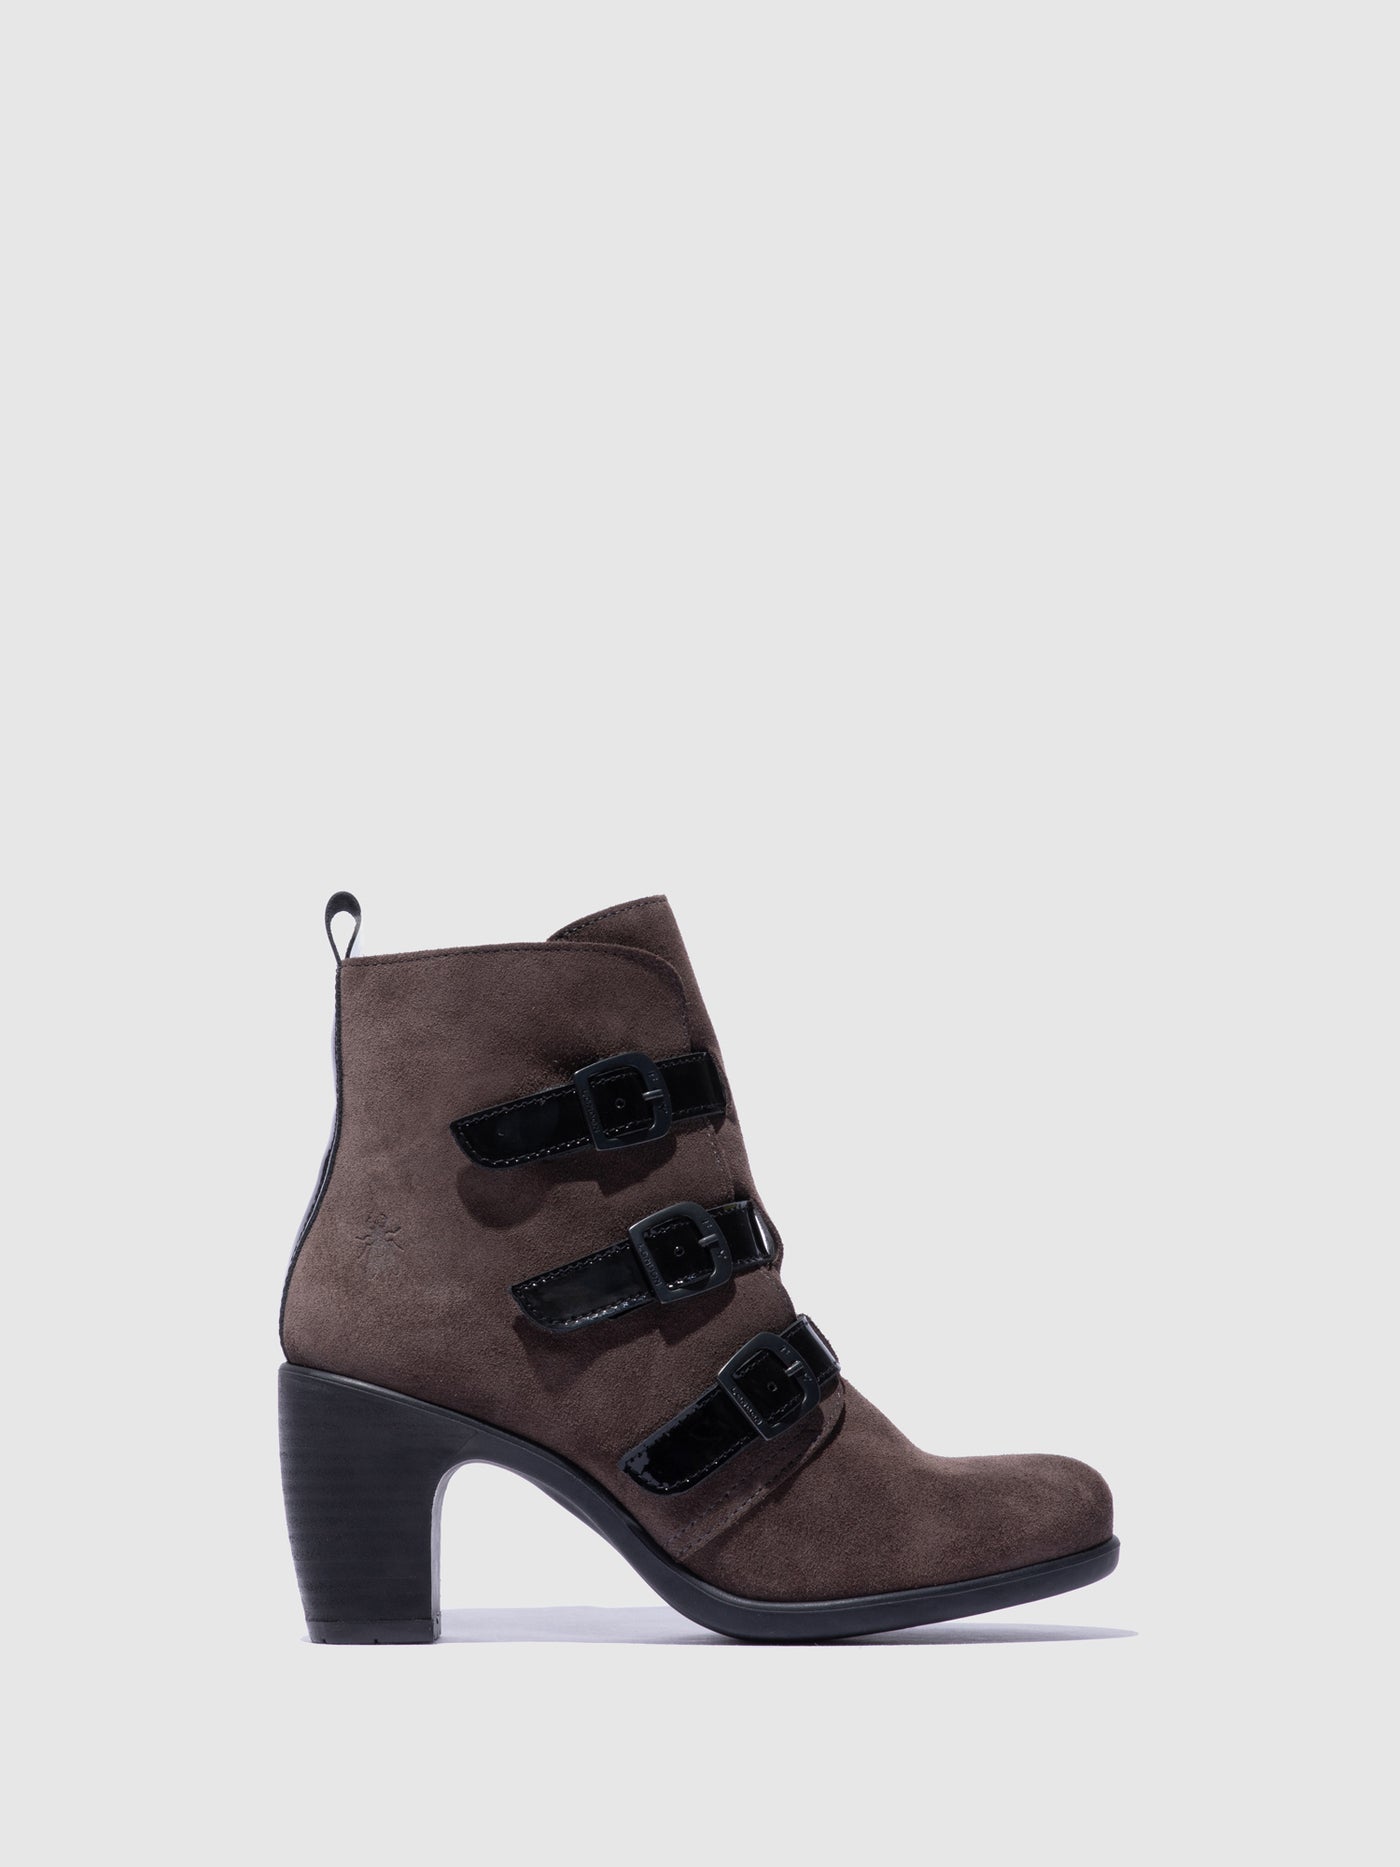 Buckle Ankle Boots KLEA012FLY ANTHRACITE/BLACK